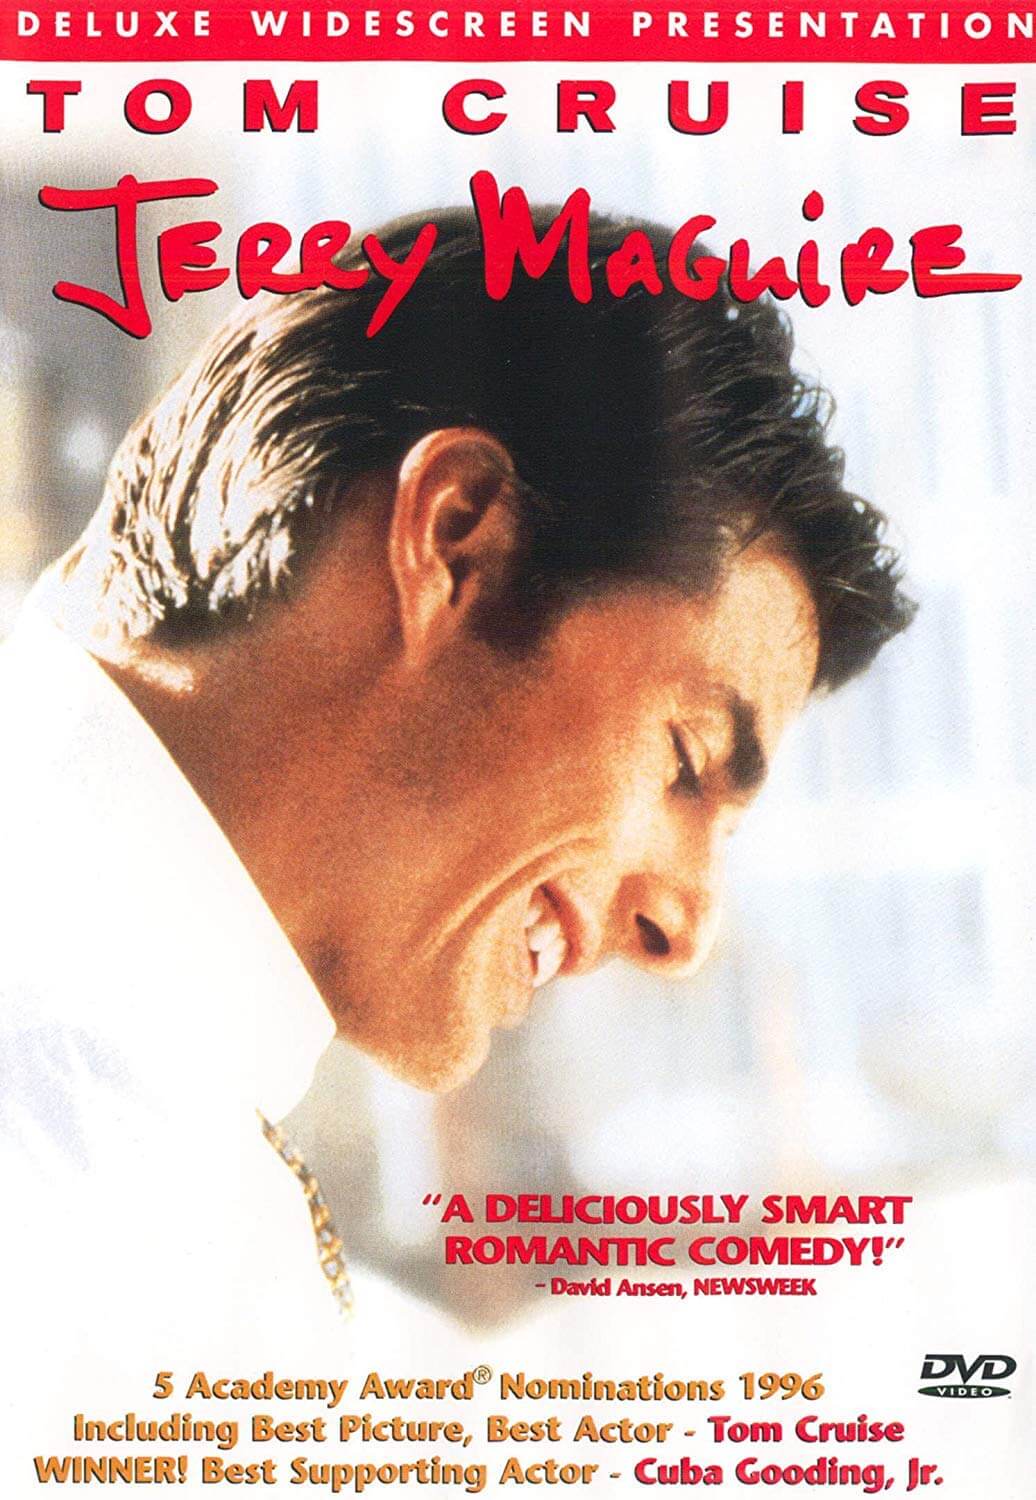 "Jerry Maguire" (1996)